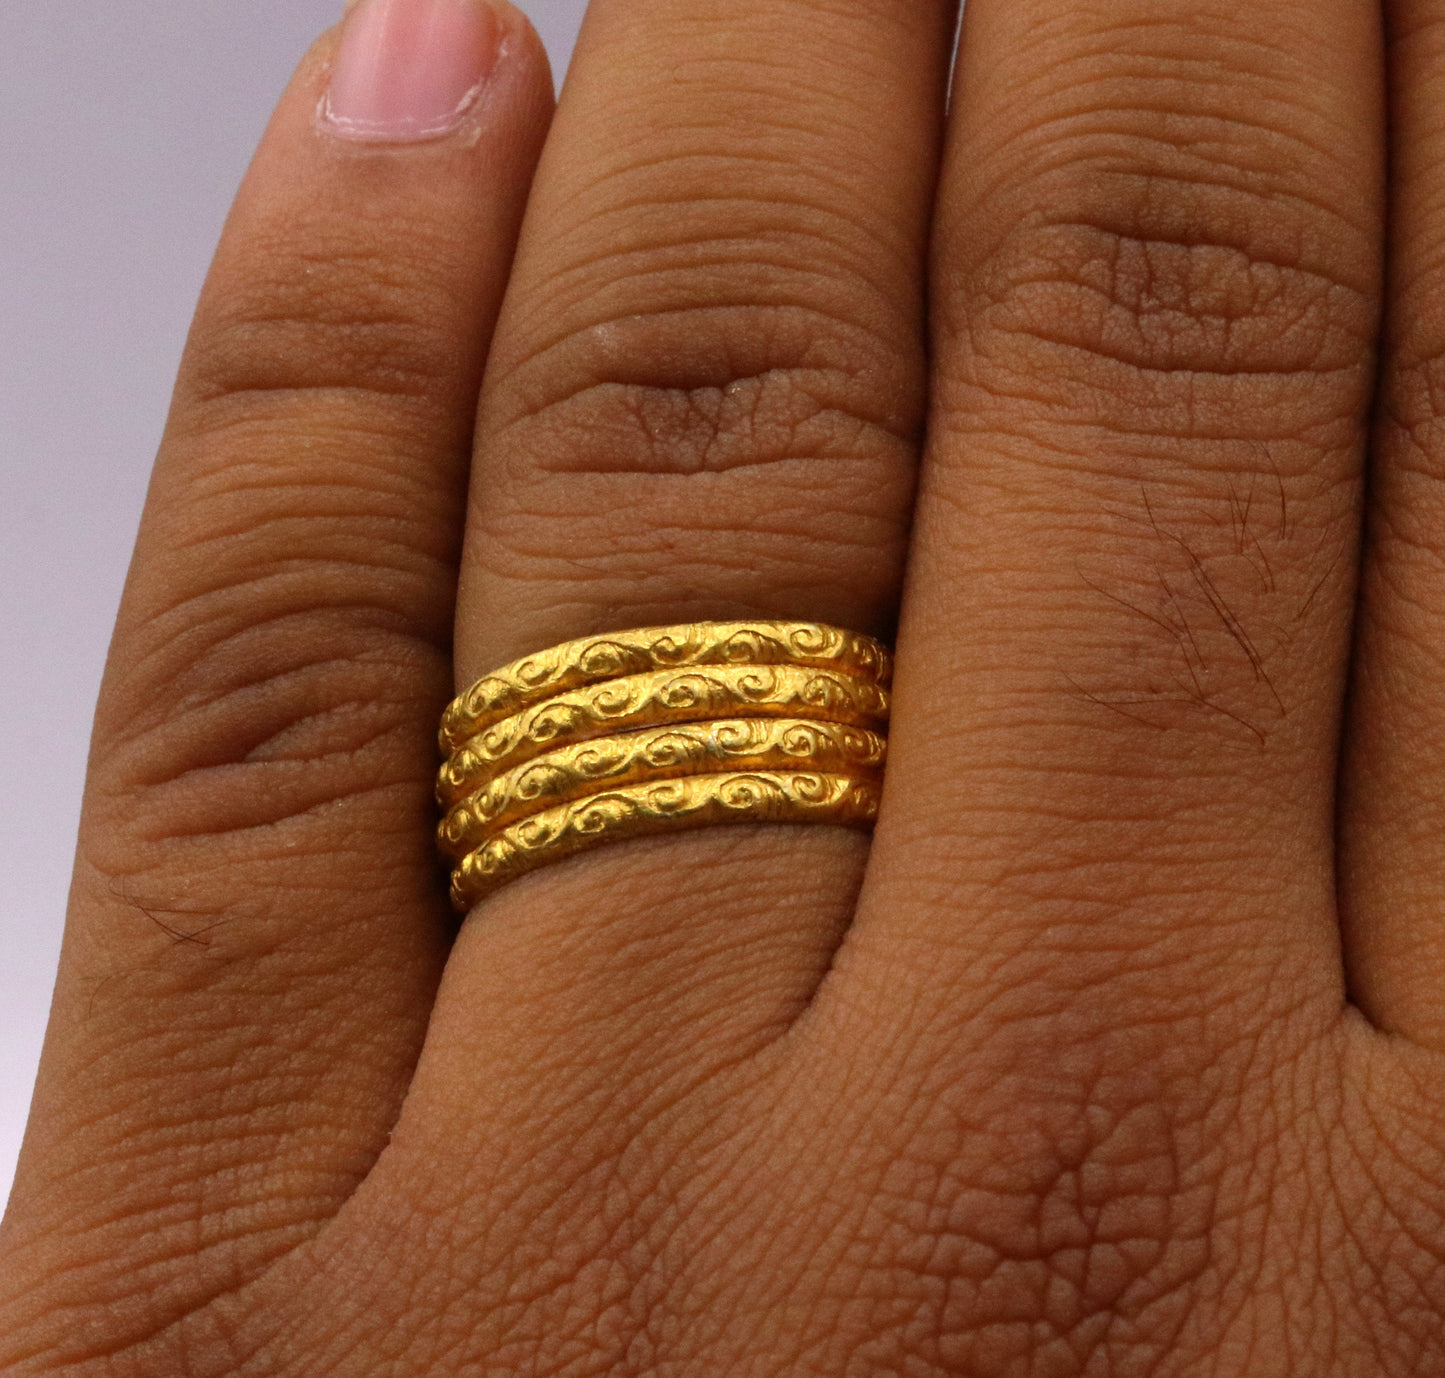 Vintage 22k carat yellow gold handmade unique traditional design ring band indian tribal unisex jewelry without stone - TRIBAL ORNAMENTS